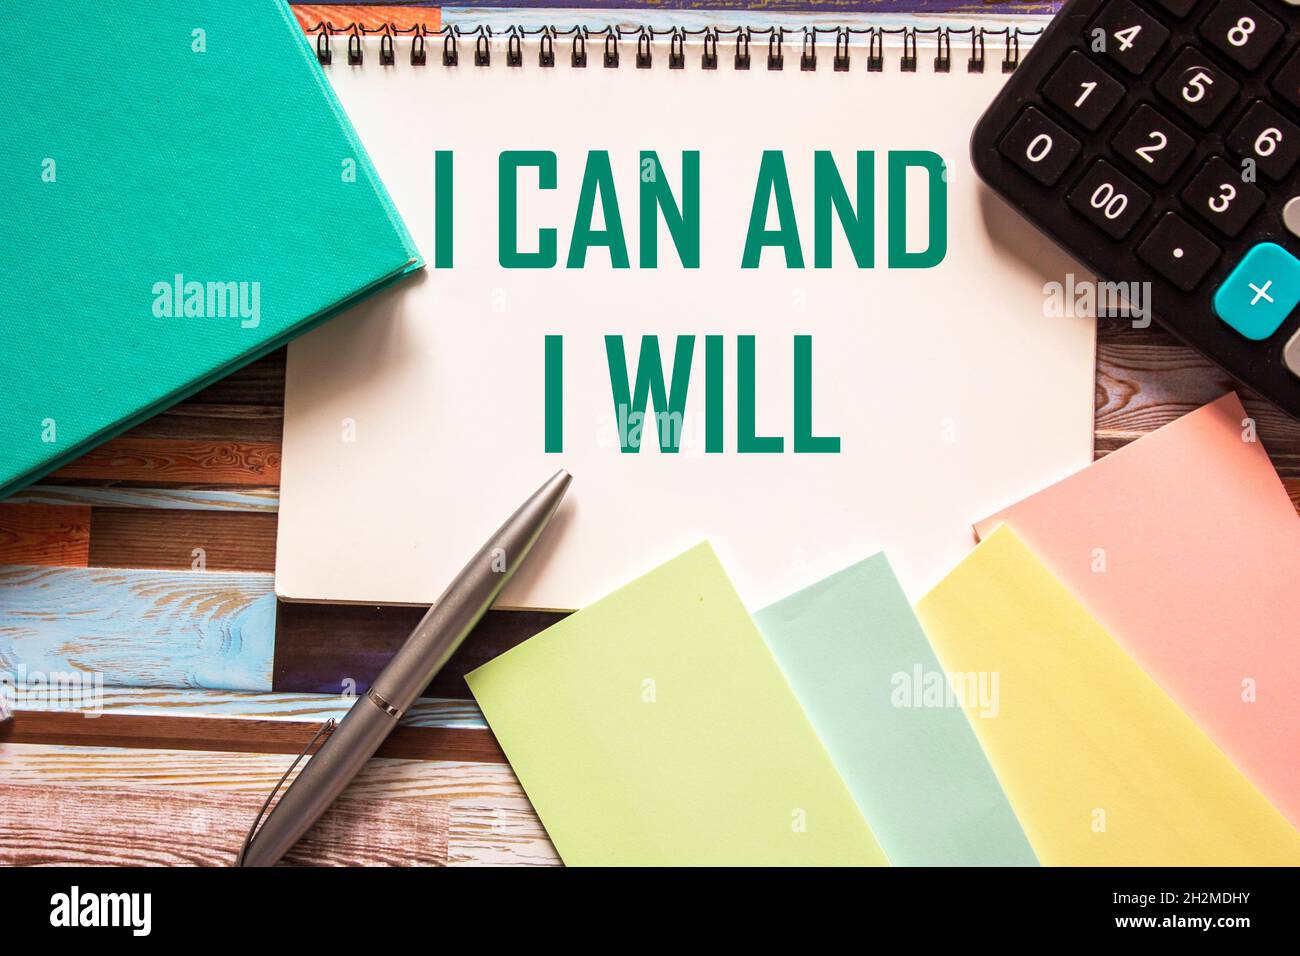 I can and I will be written on a notebook, next to colored stickers, a diary, a calculator and a pen. Striped background Stock Photo